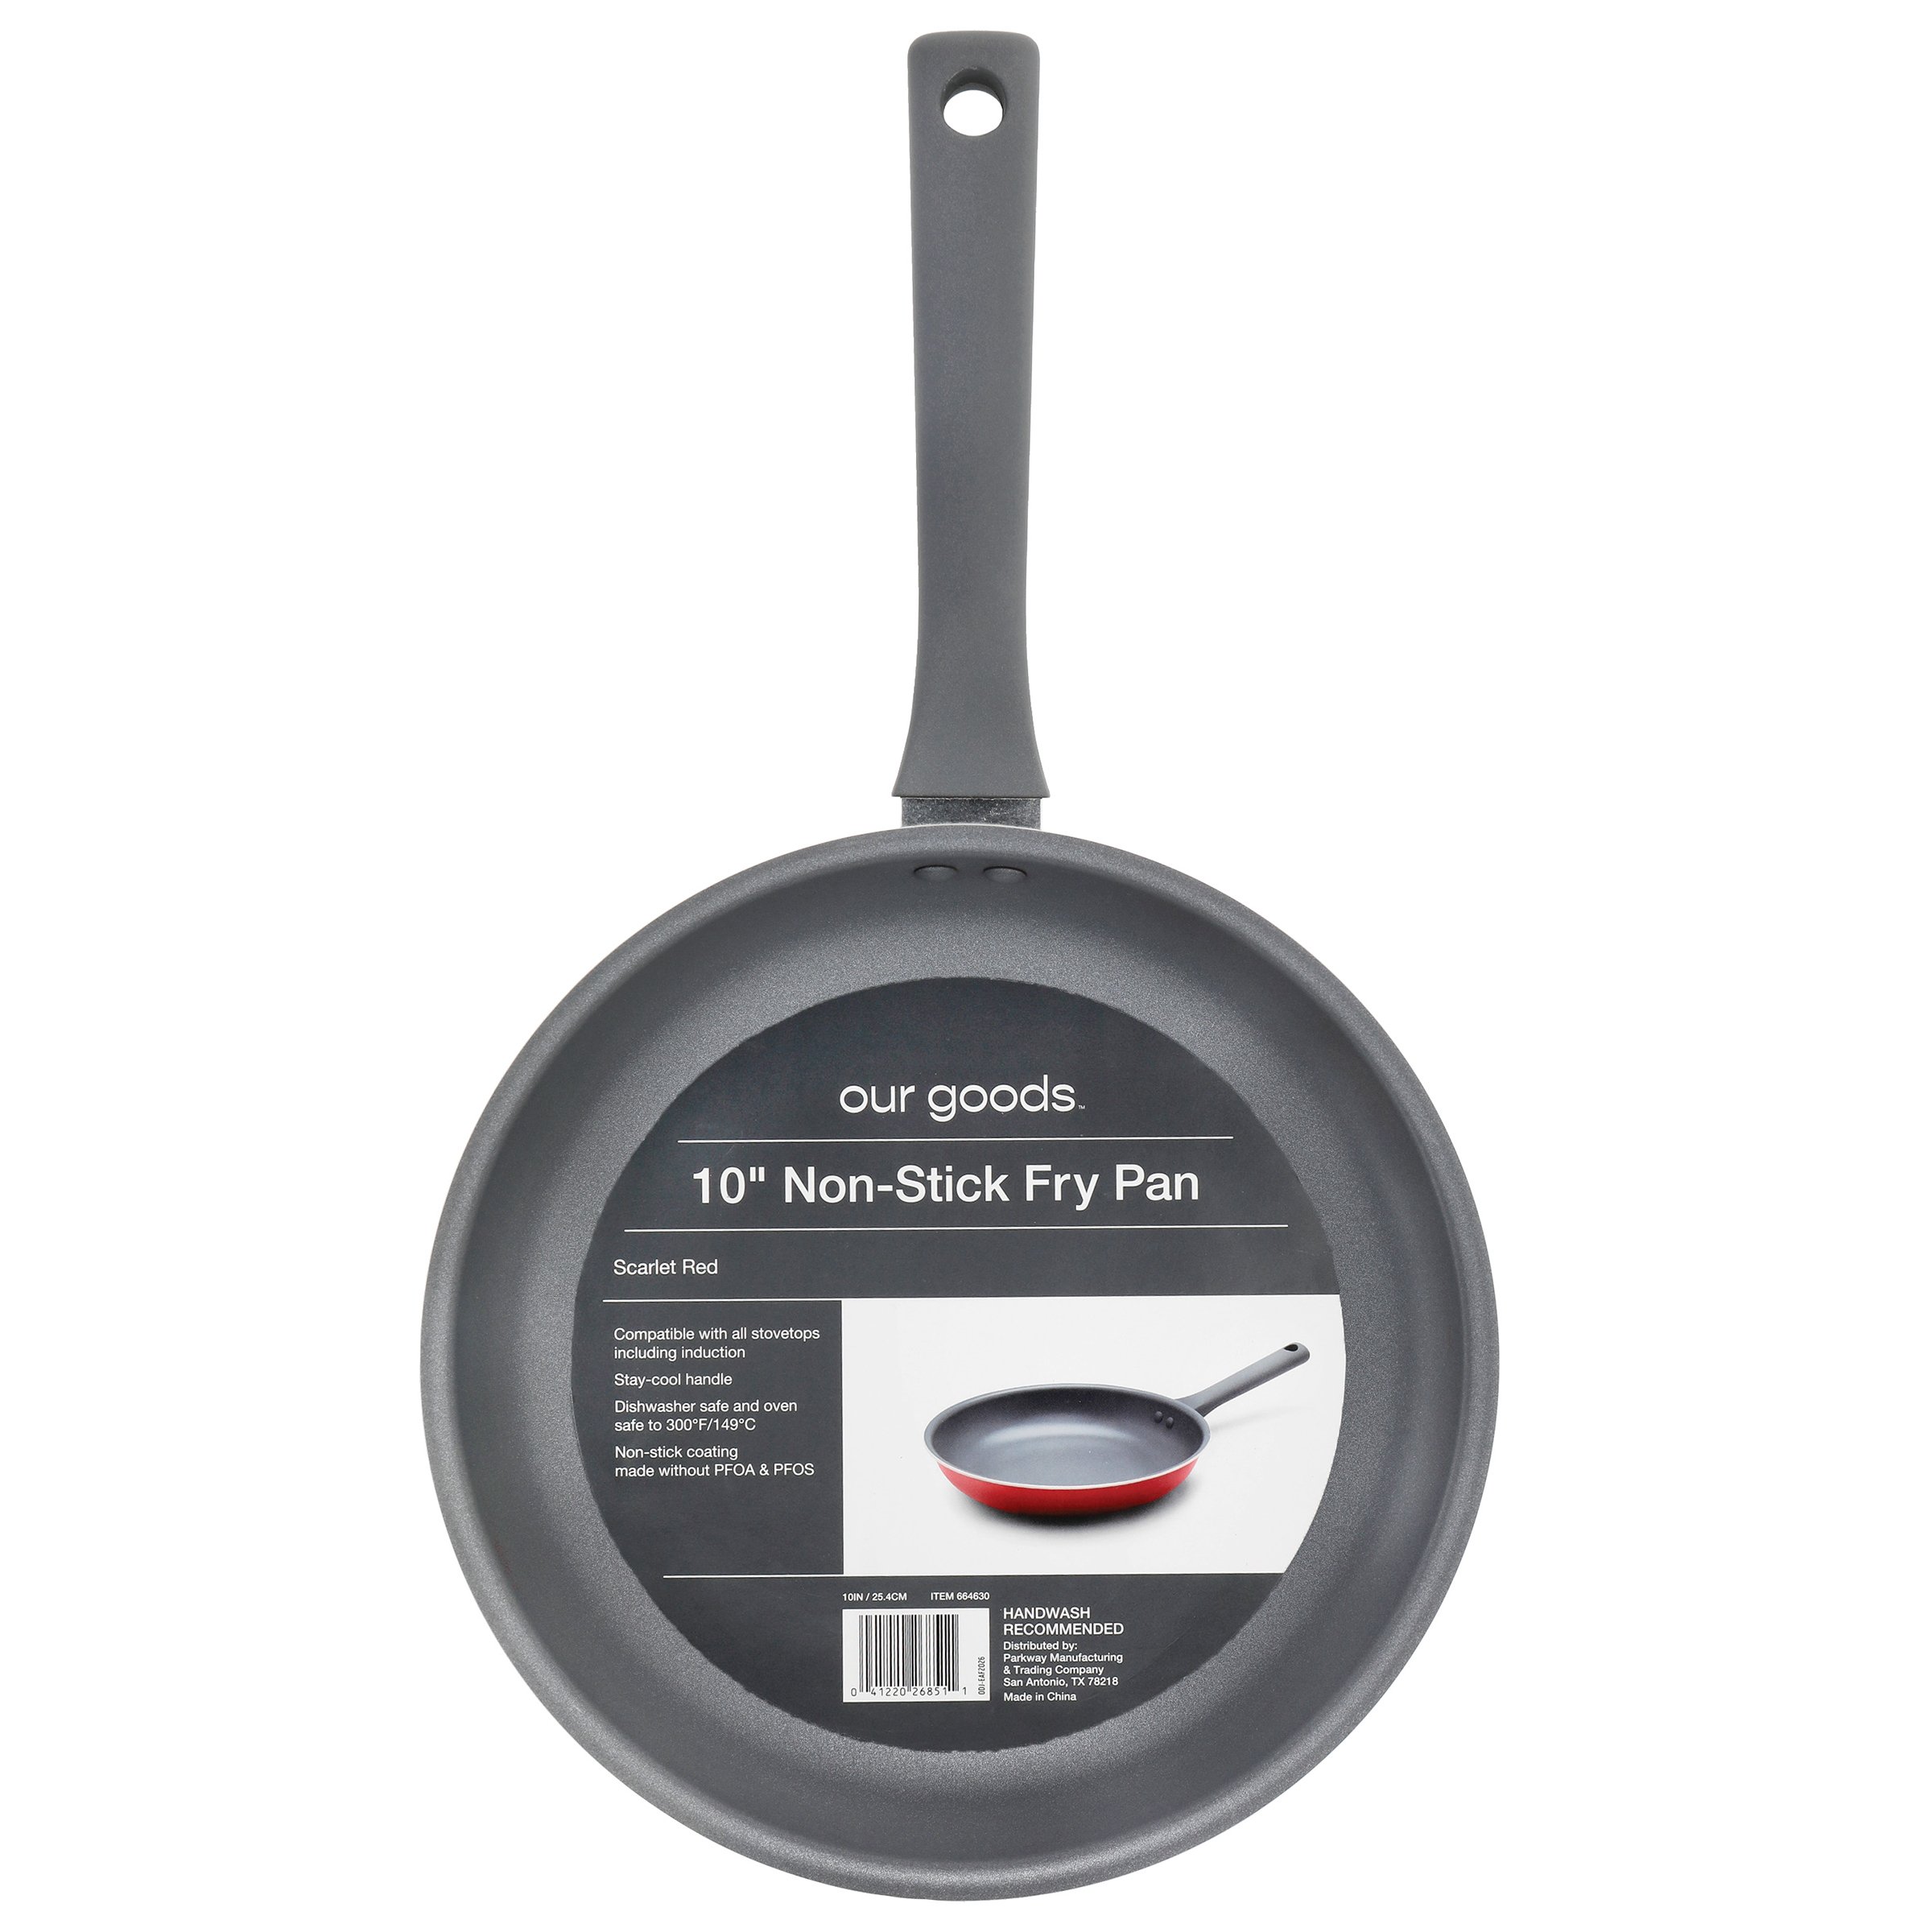 The Best Non Stick Saute Pan | 3.5 qt | Made in